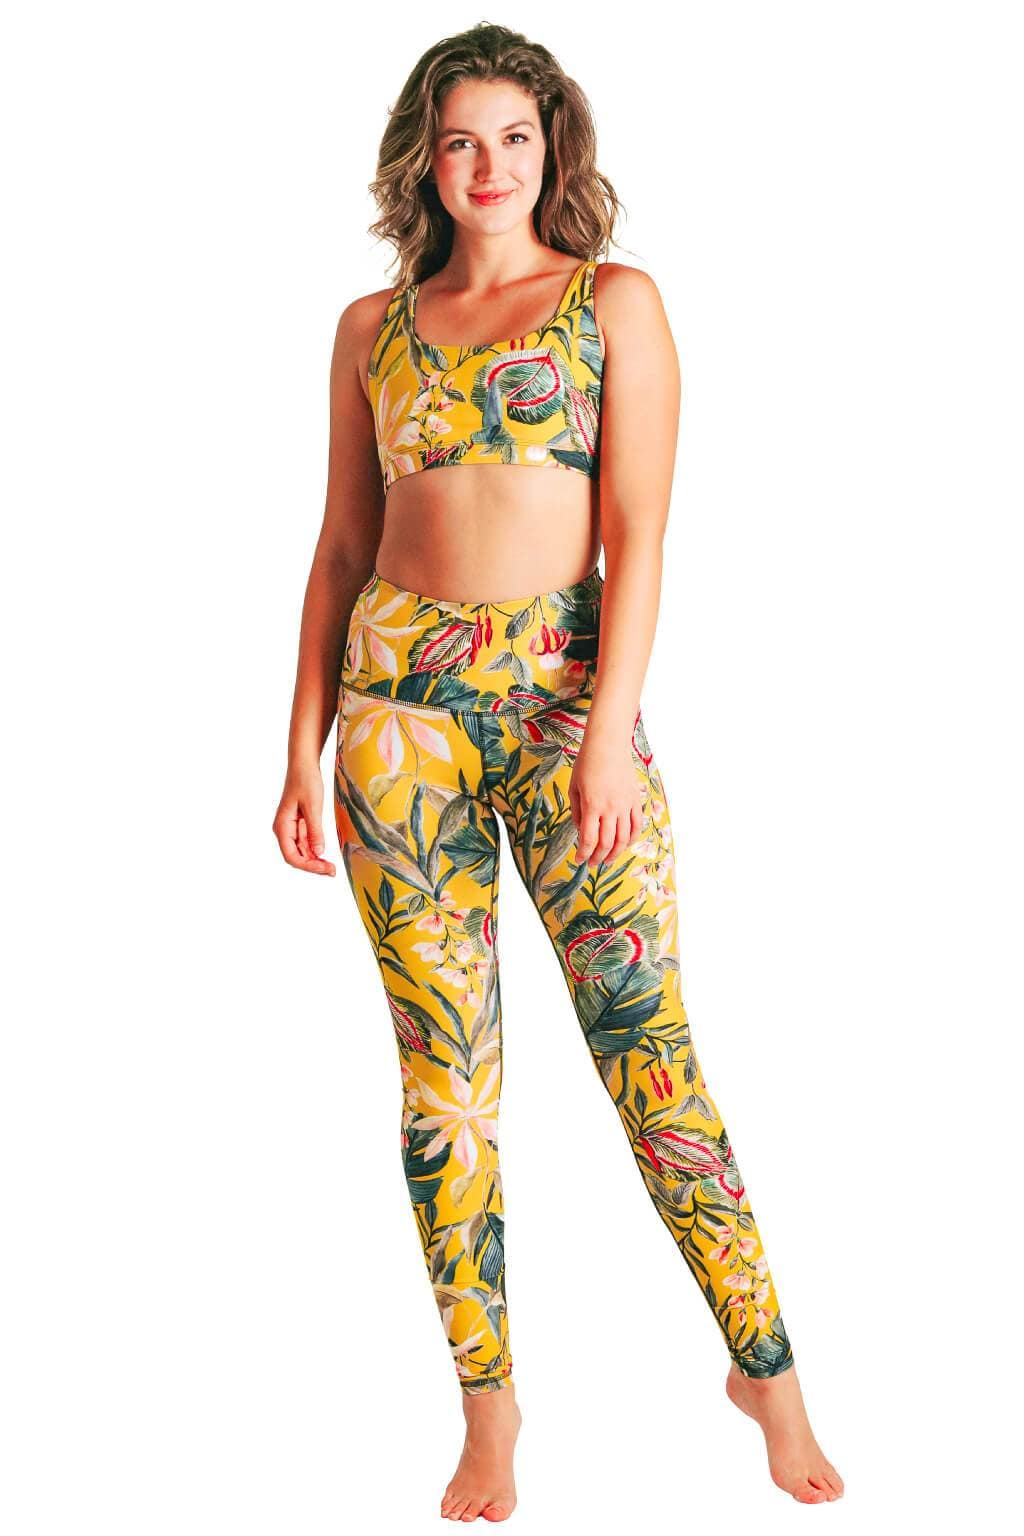 Yoga Democracy Women's Eco-friendly yoga full length leggings in Curry Up yellow with floral print. USA made from post-consumer recycled plastic bottles. Sweat wicking, anti-microbial, and quick dry ultra-soft brushed fabric.